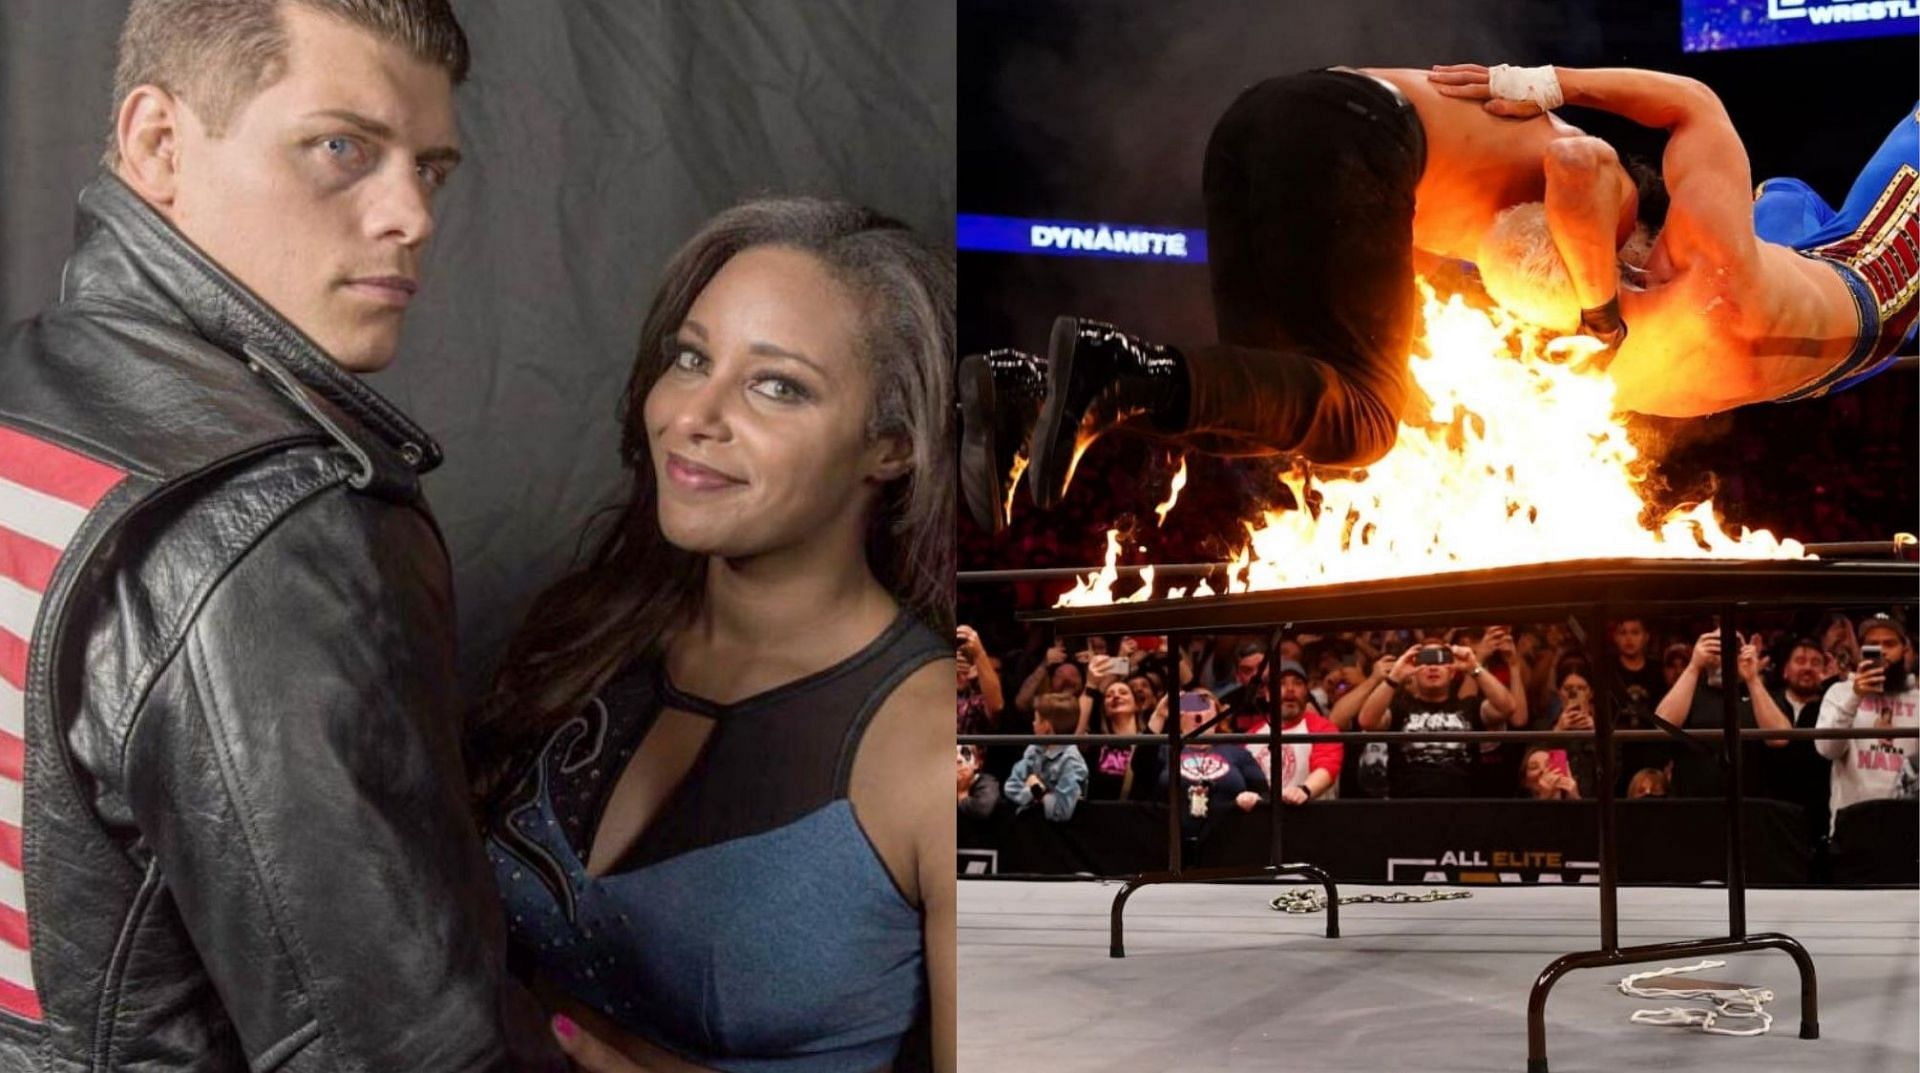 Cody Rhodes and Brandi Rhodes have been married since 2013!